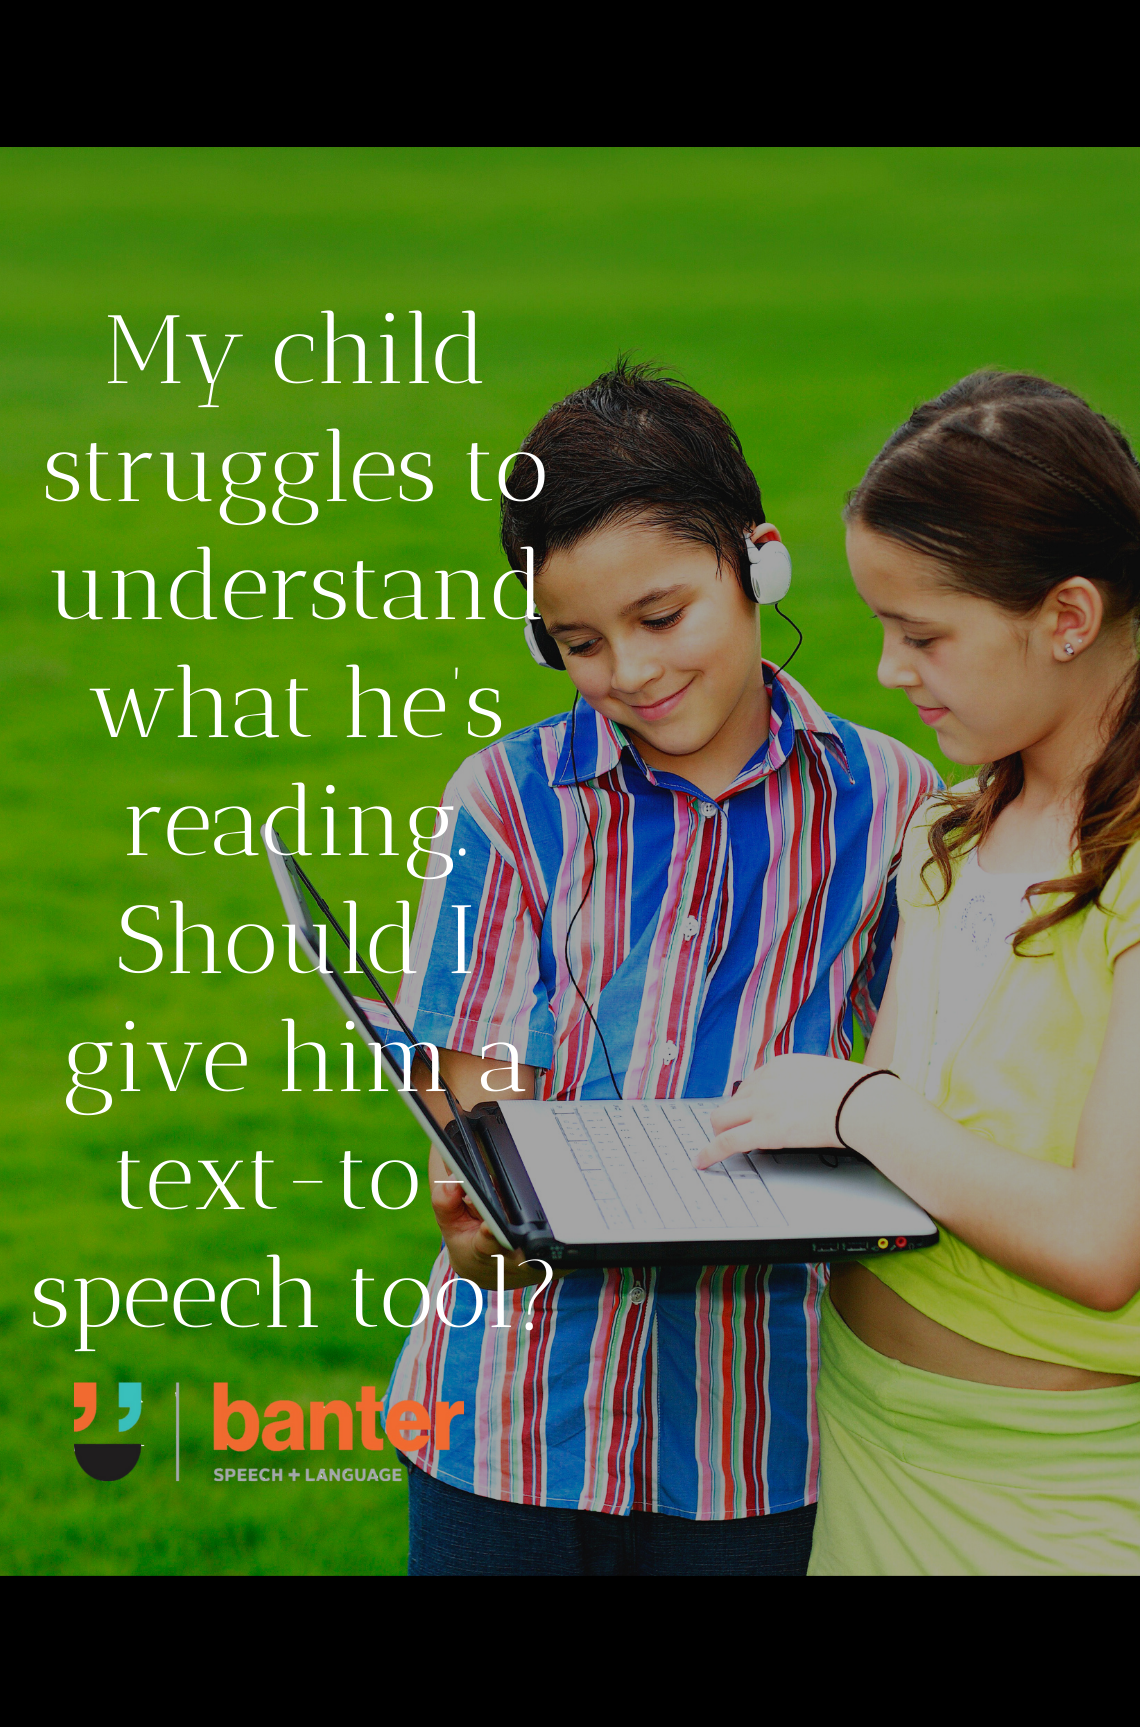 My child struggles to understand what she’s reading. Should I give her a text-to-speech tool